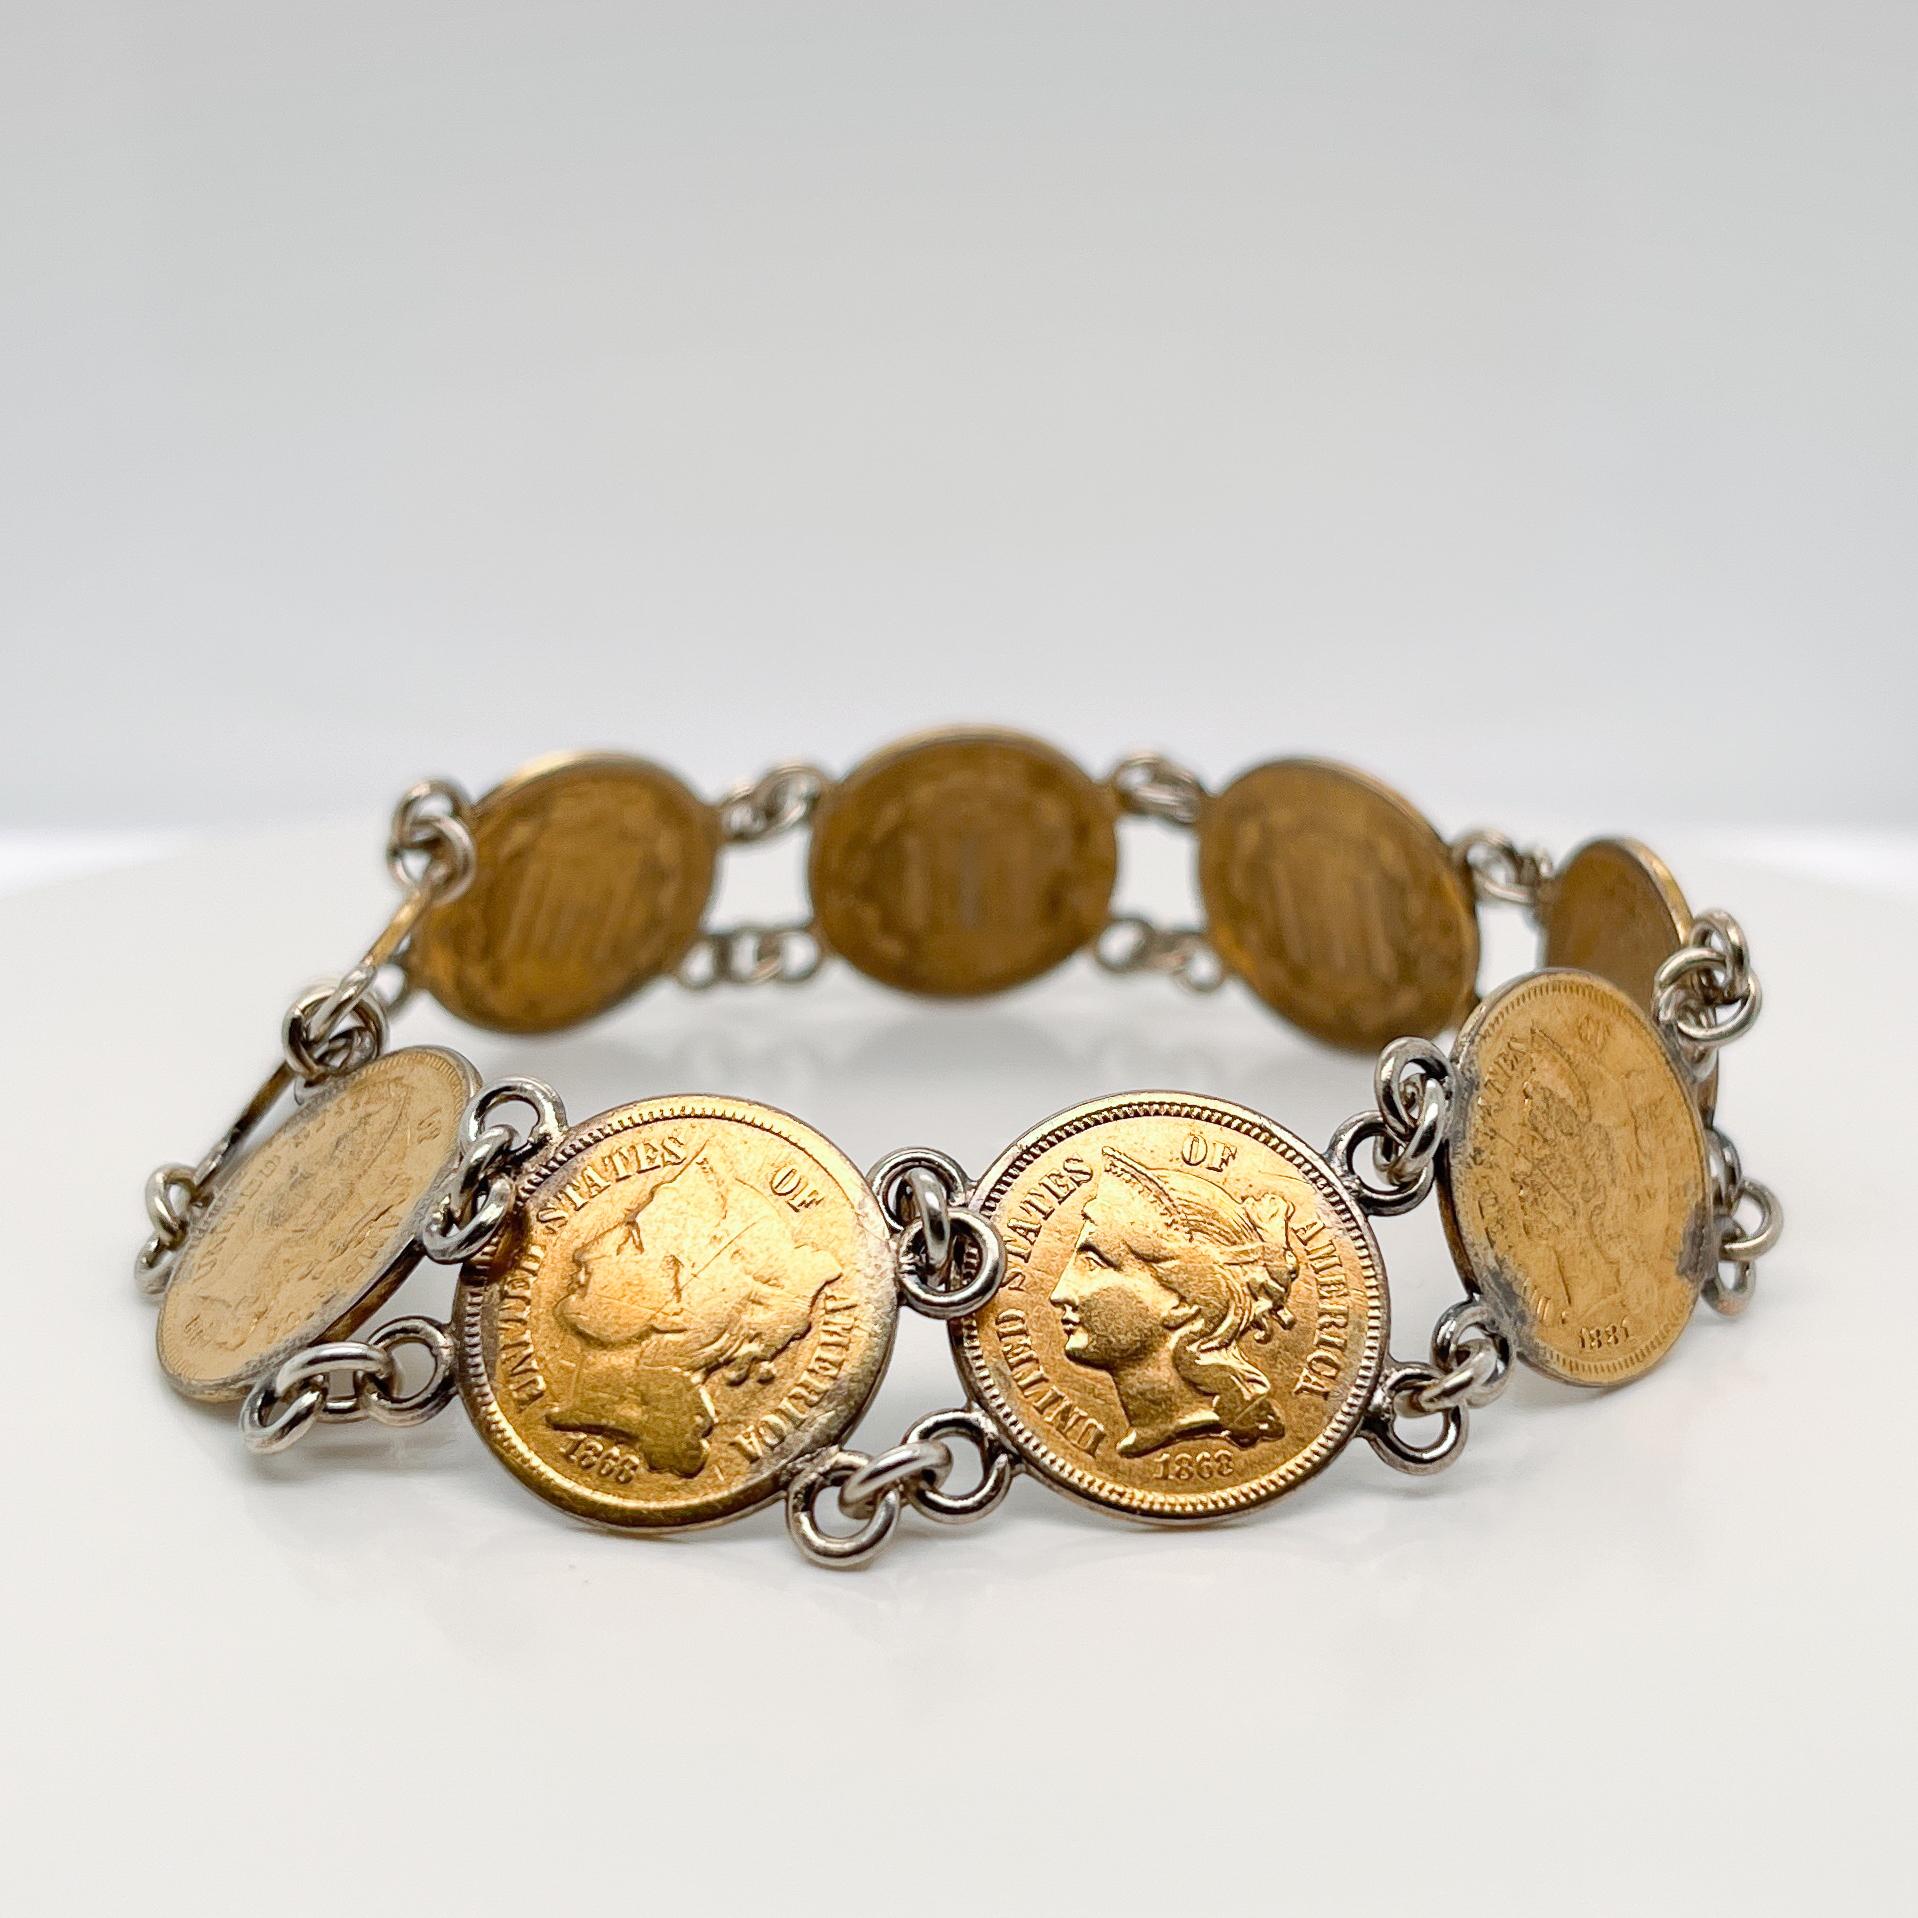 A very fine antique coin bracelet.

Comprised of American three-cent coins attached with silver jump rings.

The coins have been embellished with gilding.

Simply a great coin bracelet!

Date:
20th Century

Overall Condition:
It is in overall good,